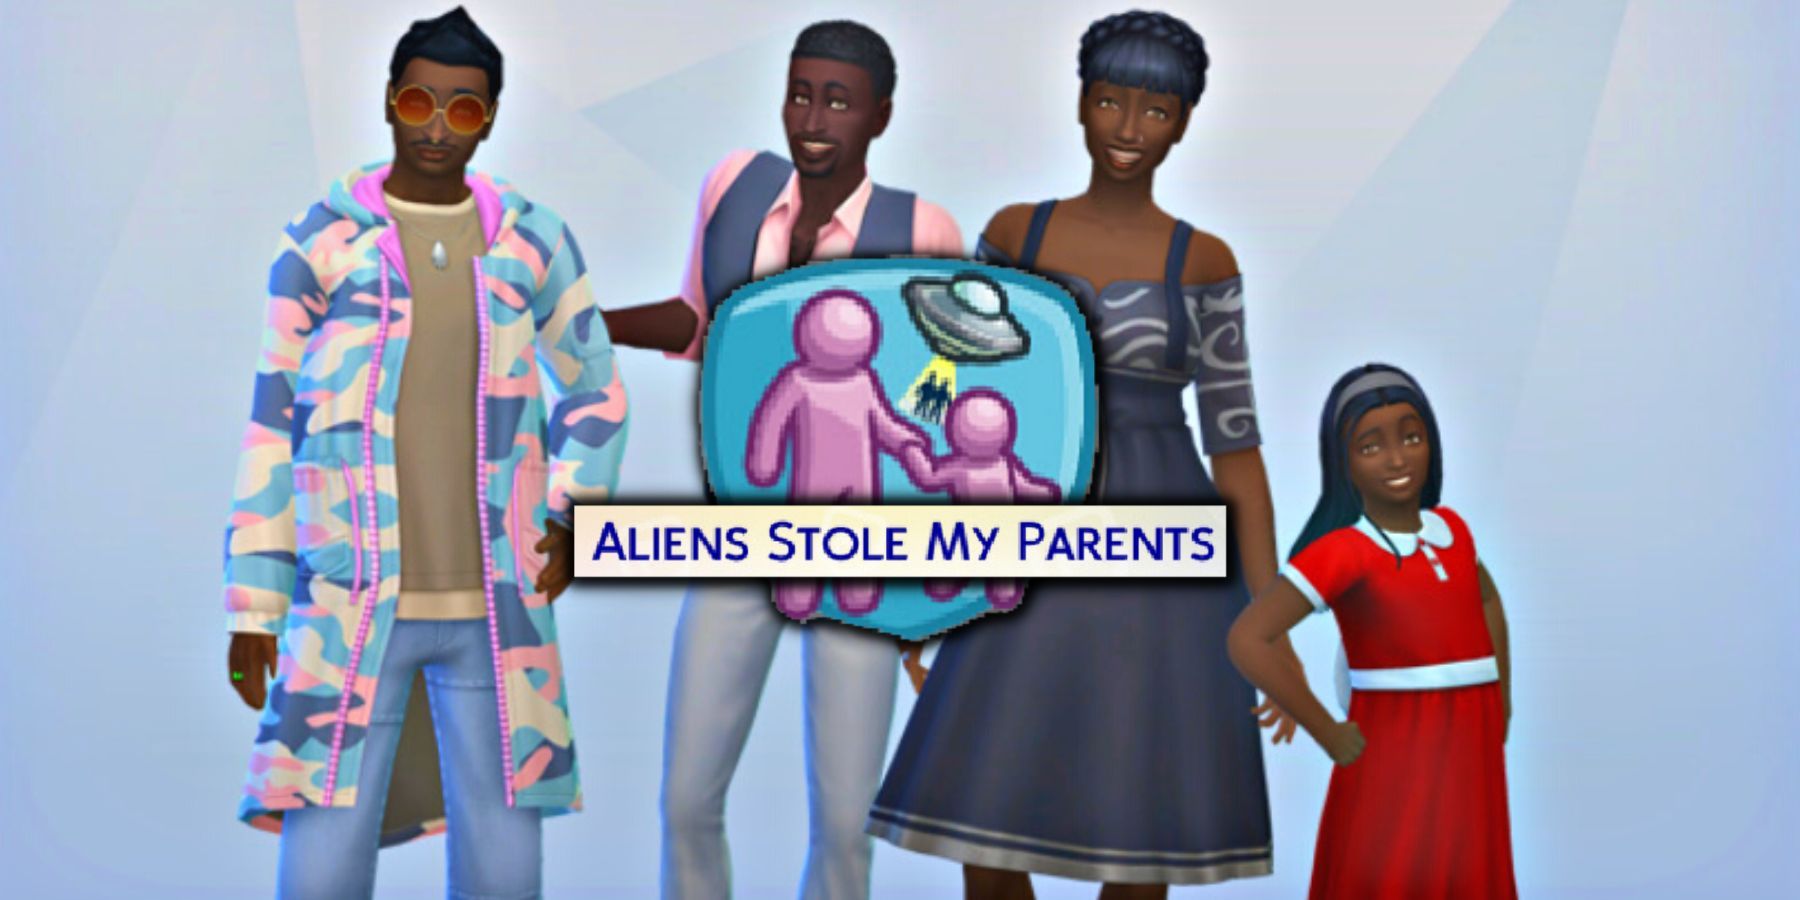 The Sims 4: How to Complete the Aliens Stole My Parents
Scenario